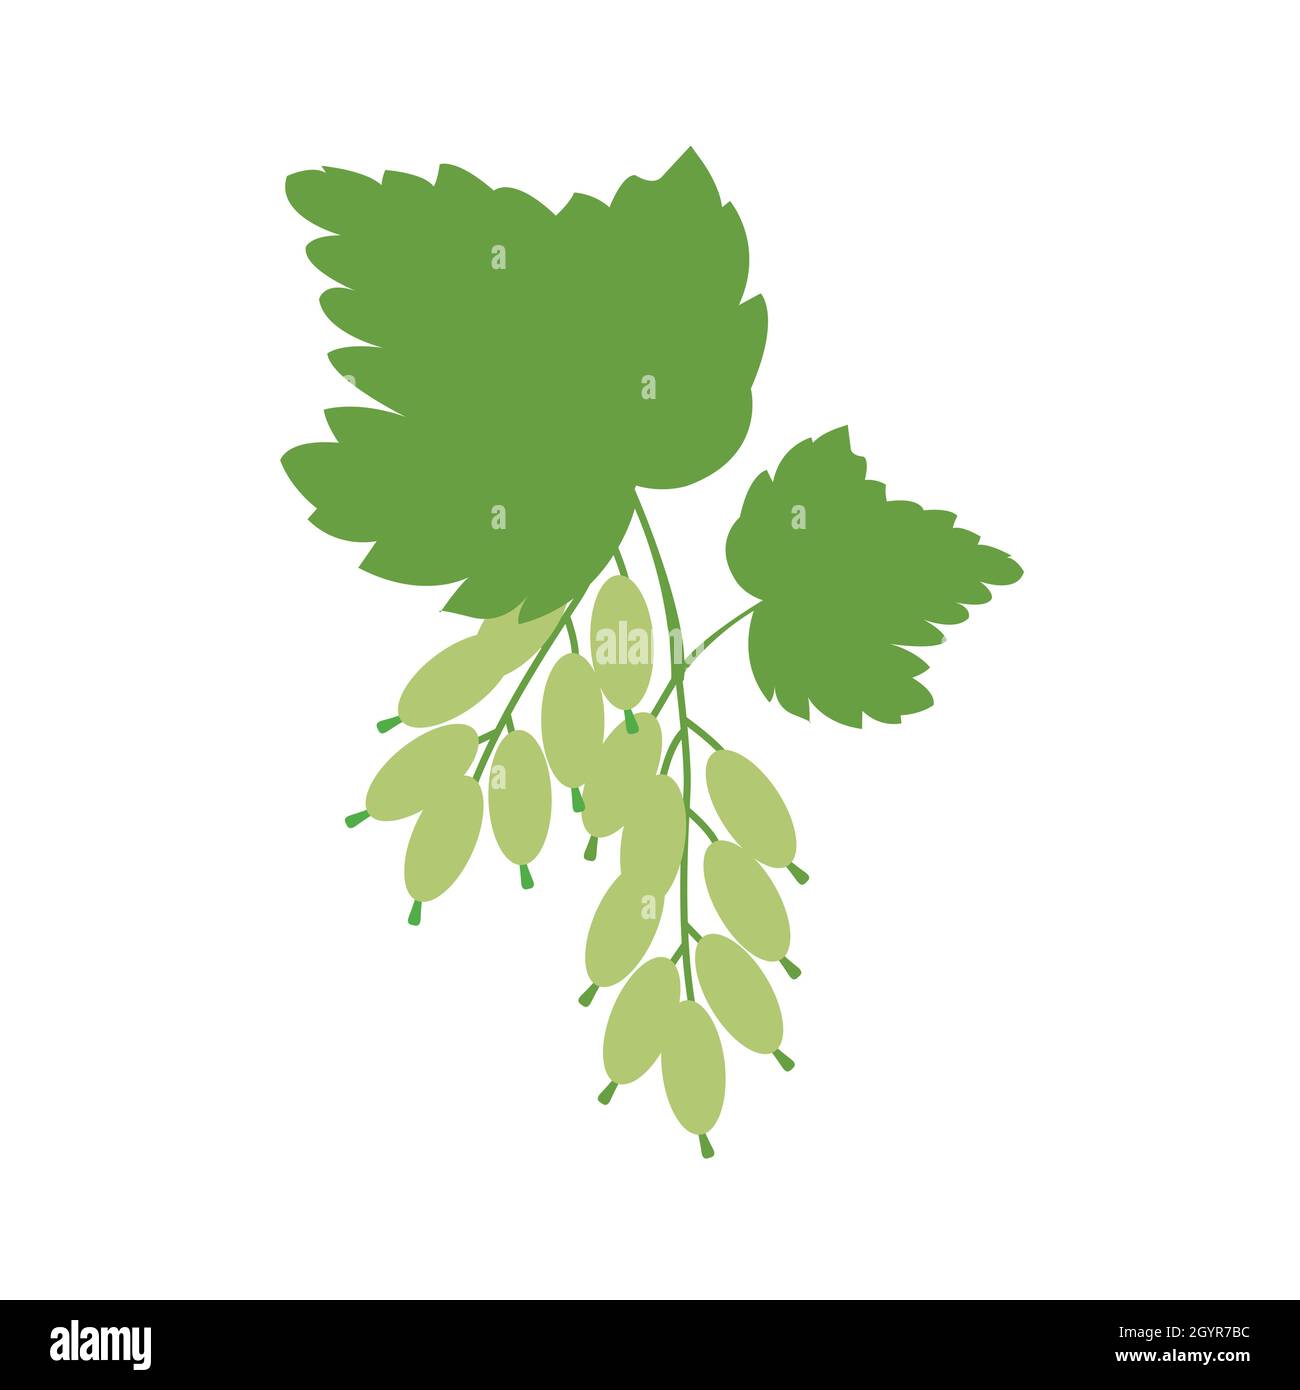 a mint leave illustration design vector on white background. Stock Vector